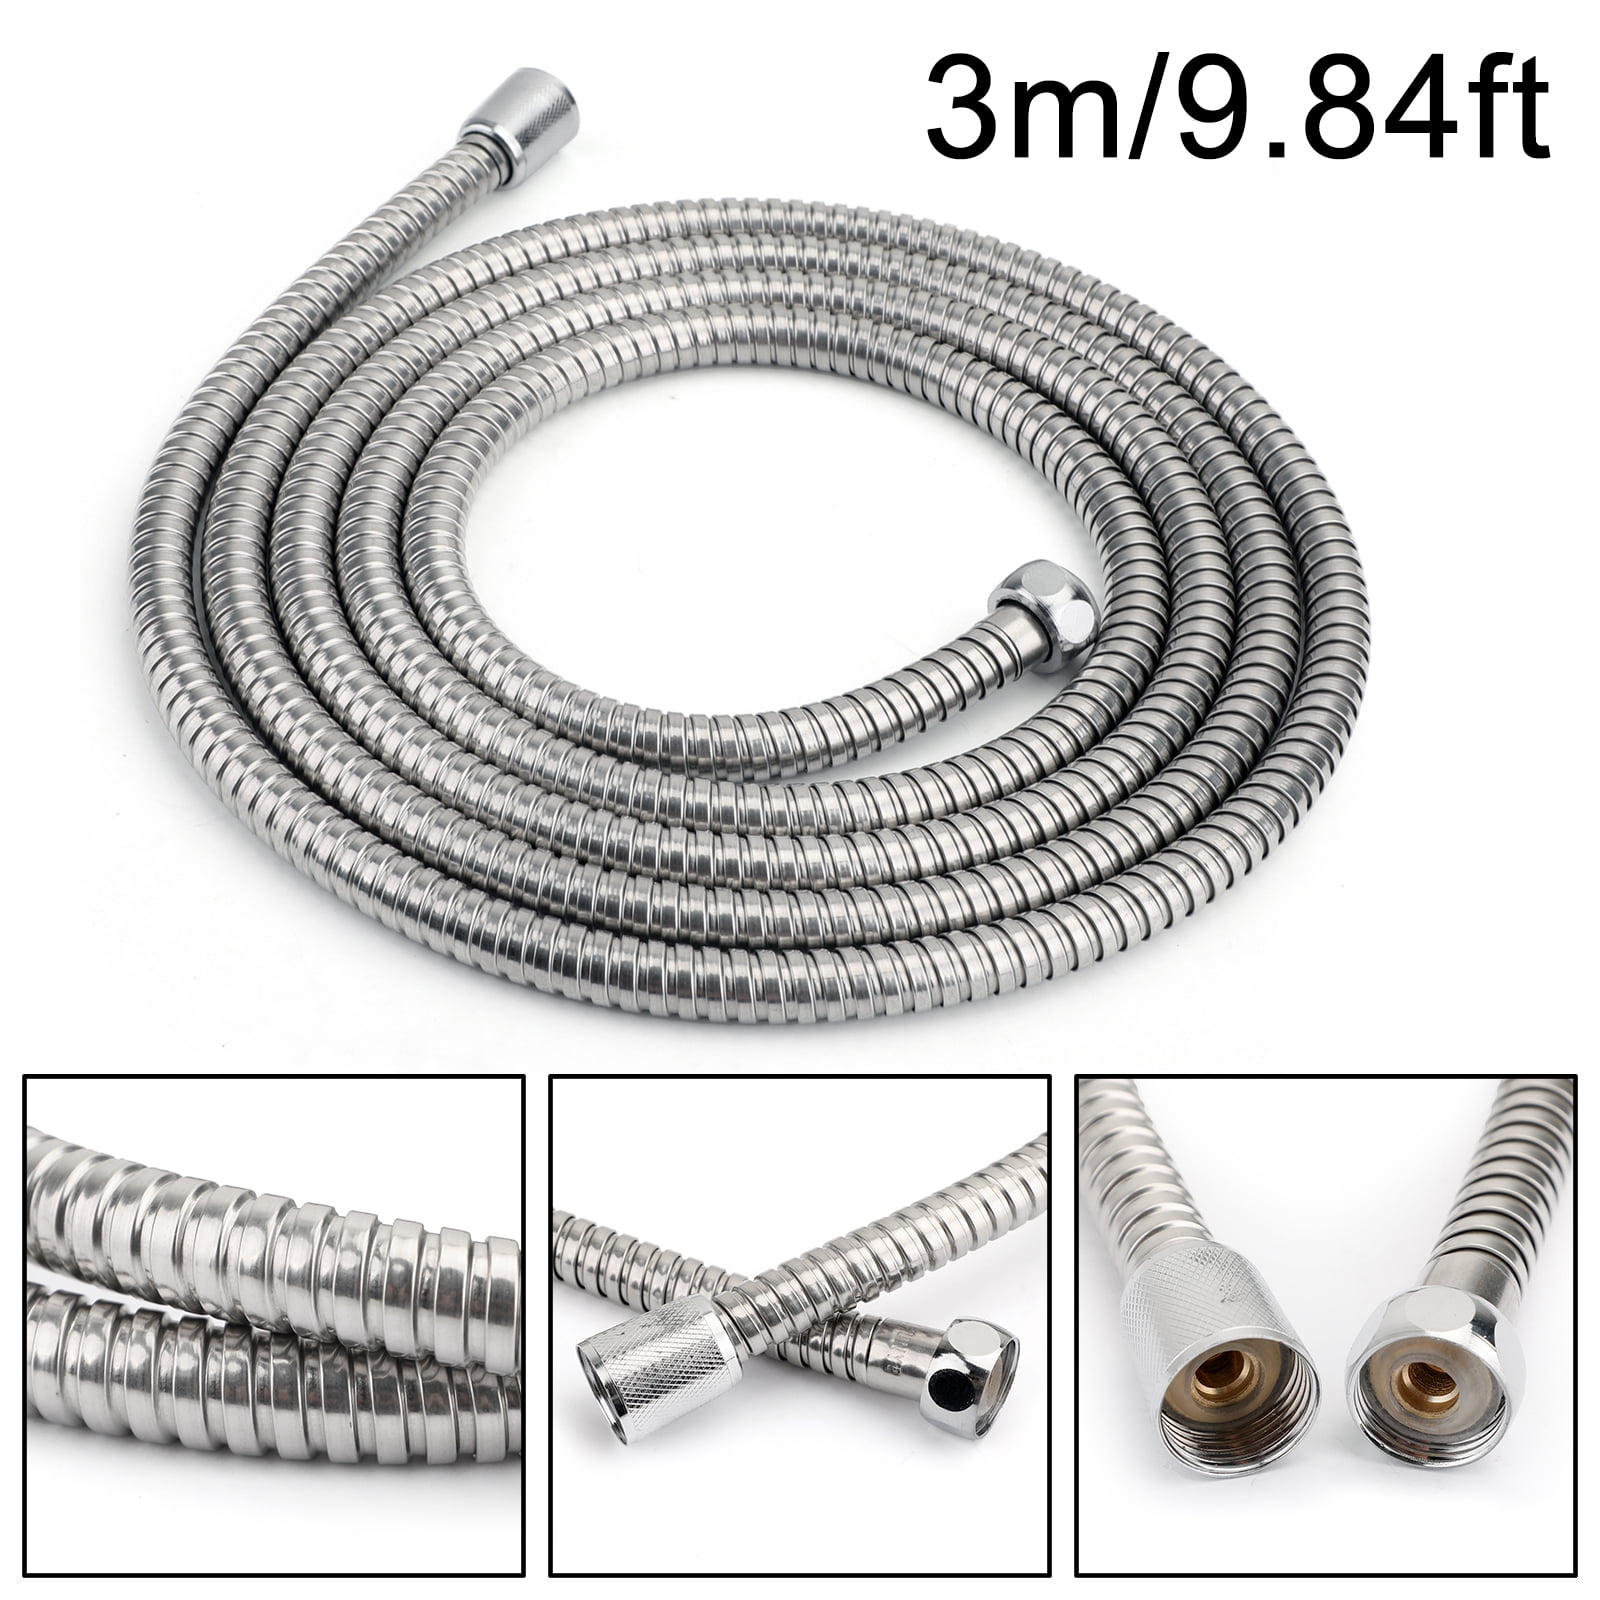 New  extra long stainless steel chrome flexible SHOWER head hose bathroom PIPE 